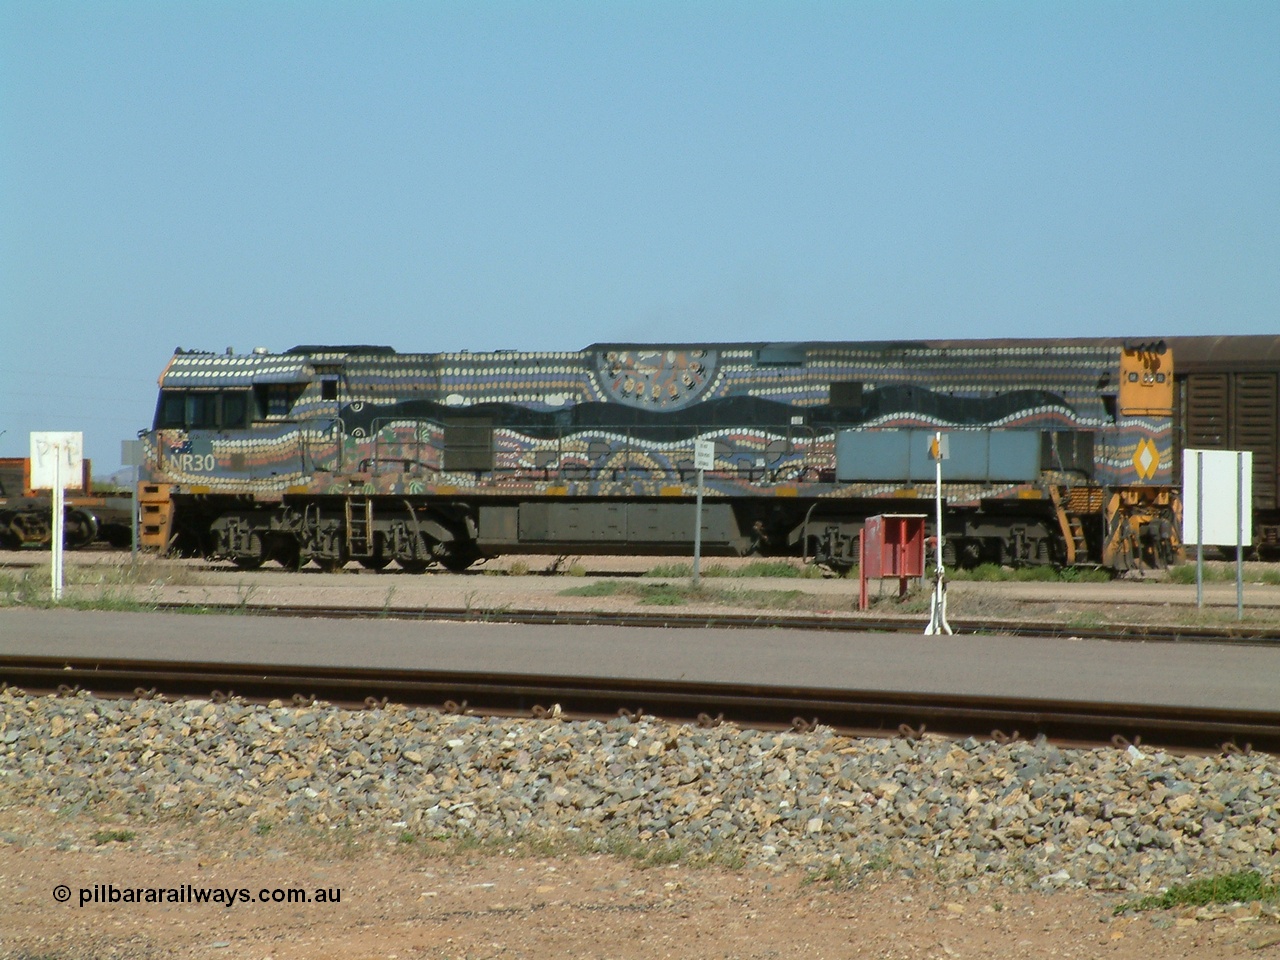 030404 103013
Port Augusta, Goninan built GE model Cv40-9i NR class unit NR 30 serial 7250-05 / 97-232 was painted in a Bessie Liddle of Alice Springs designed aboriginal livery titled 'Warmi' or the snake, John Moriarty of Balarinji Design did the artwork.
Keywords: NR-class;NR30;Goninan;GE;Cv40-9i;7250-05/97-232;